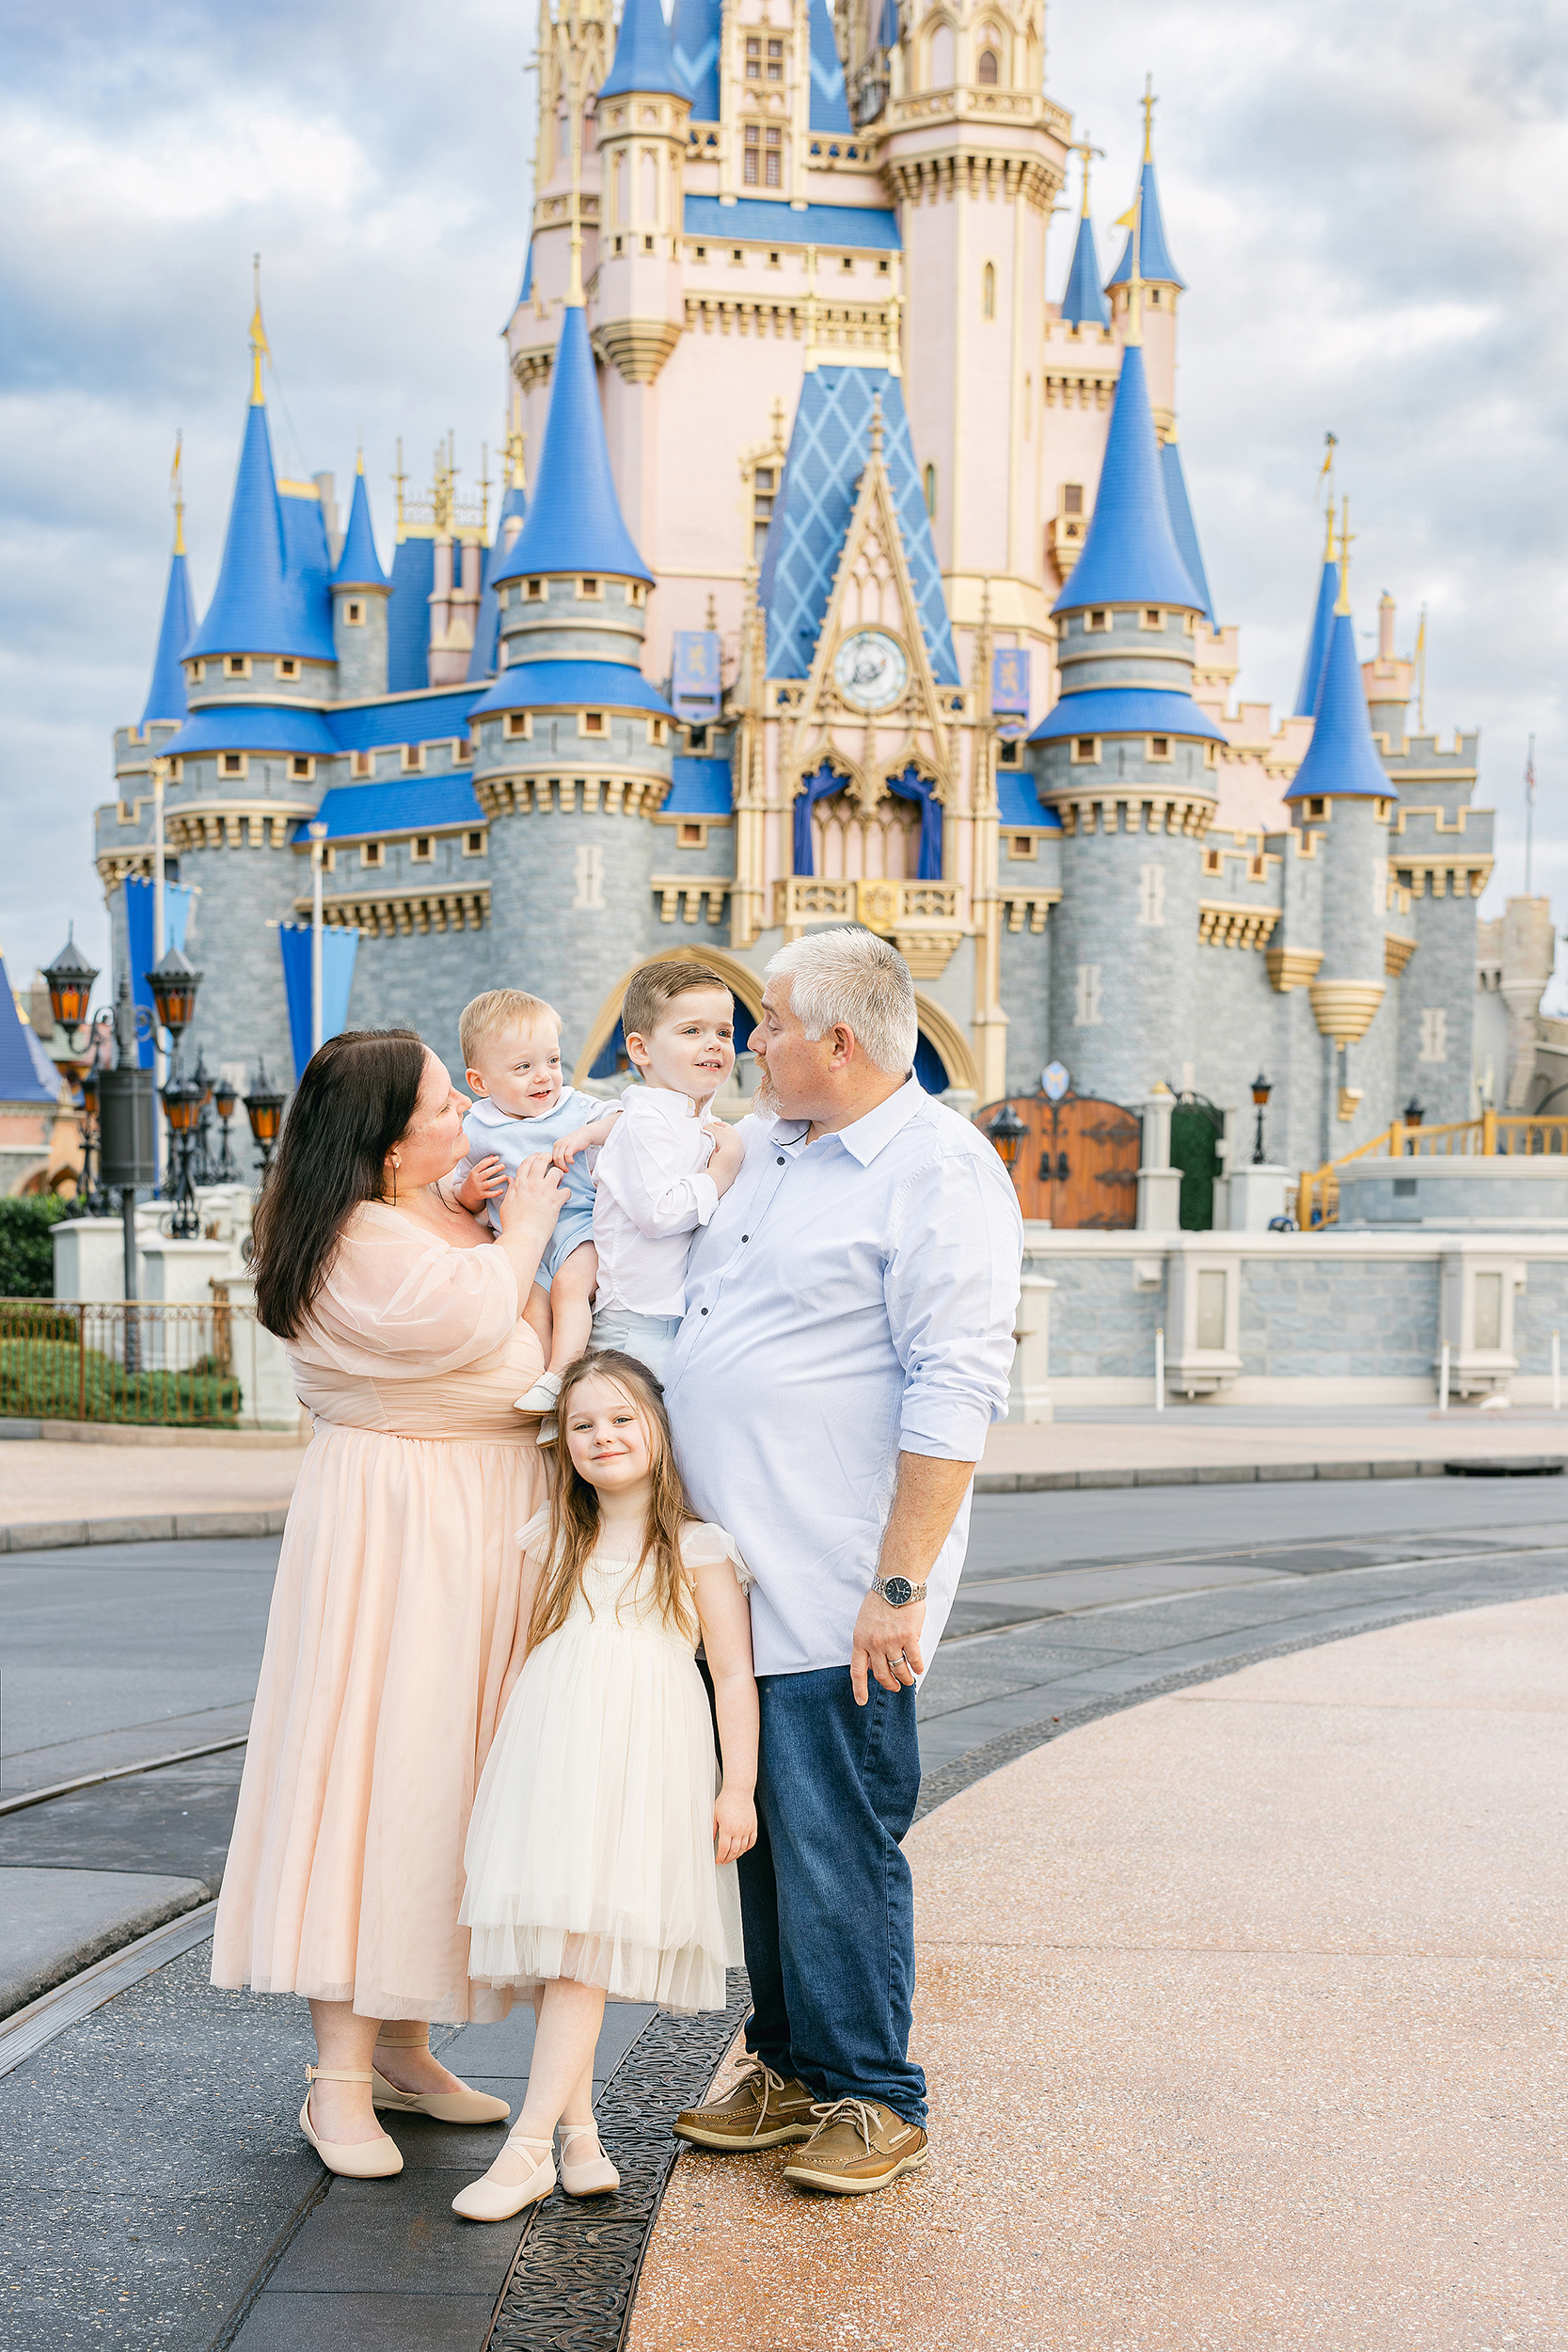 A family laughs together in front of Cinderella's Castle at the Magic Kingdom.